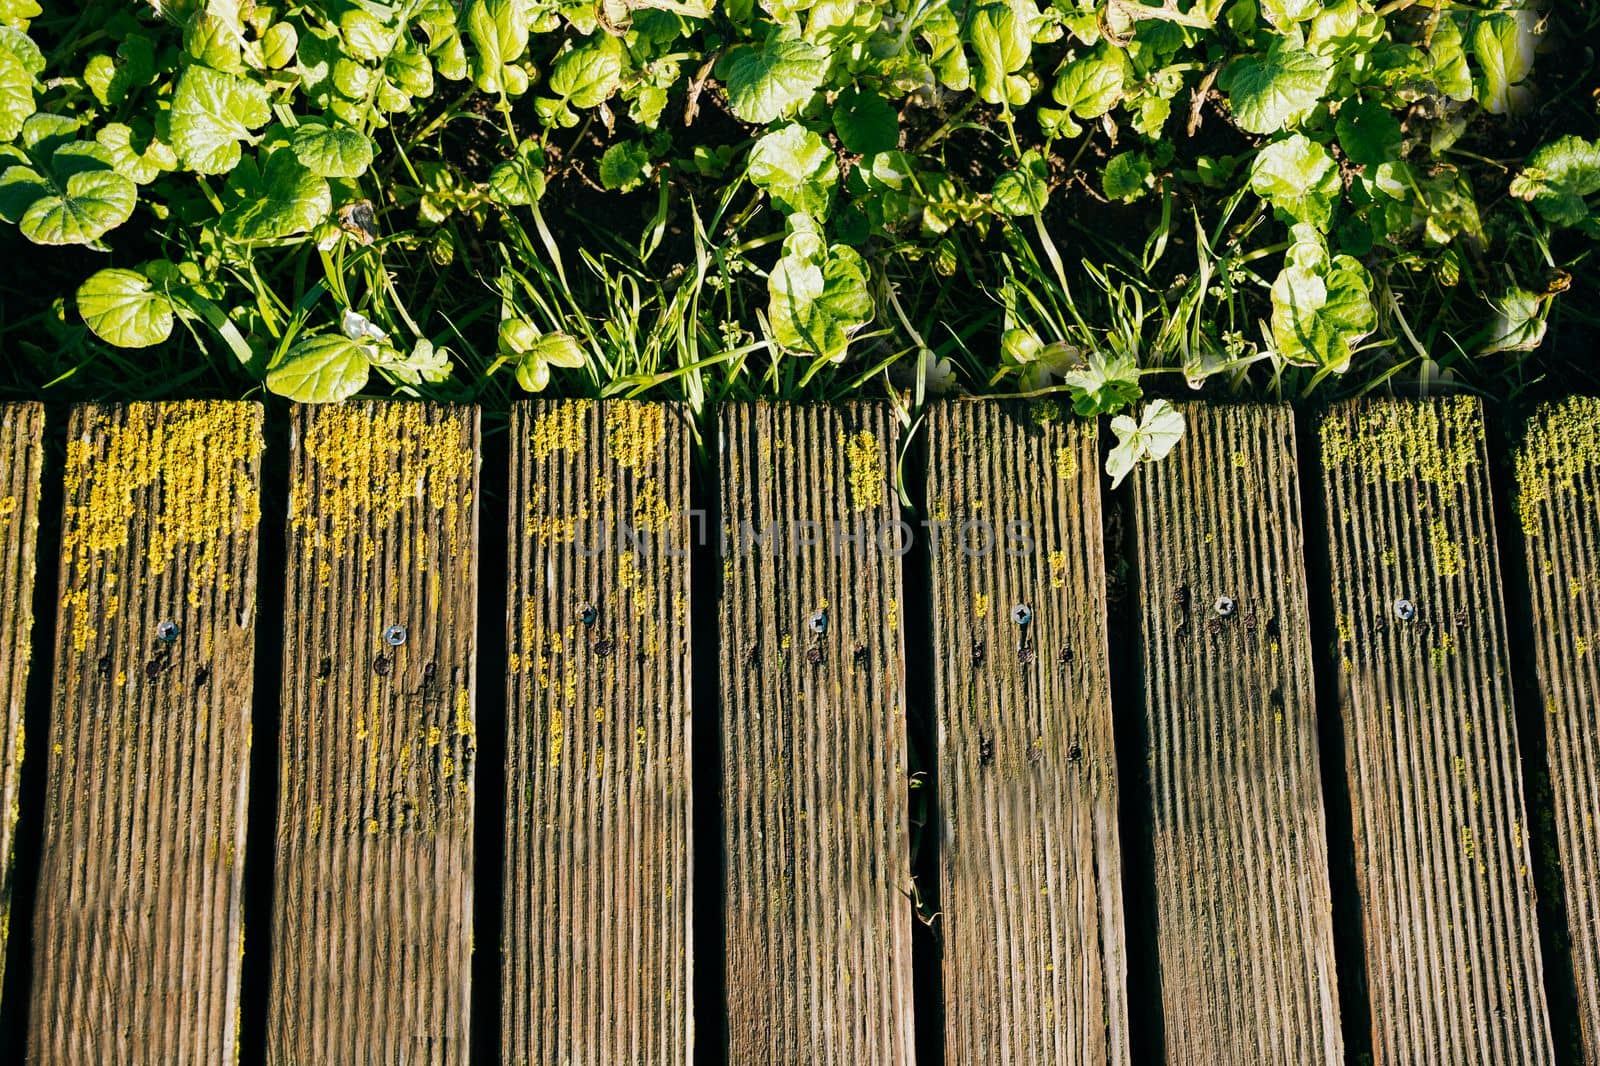 Old weathered wood planks covered with green moss and green leaves.